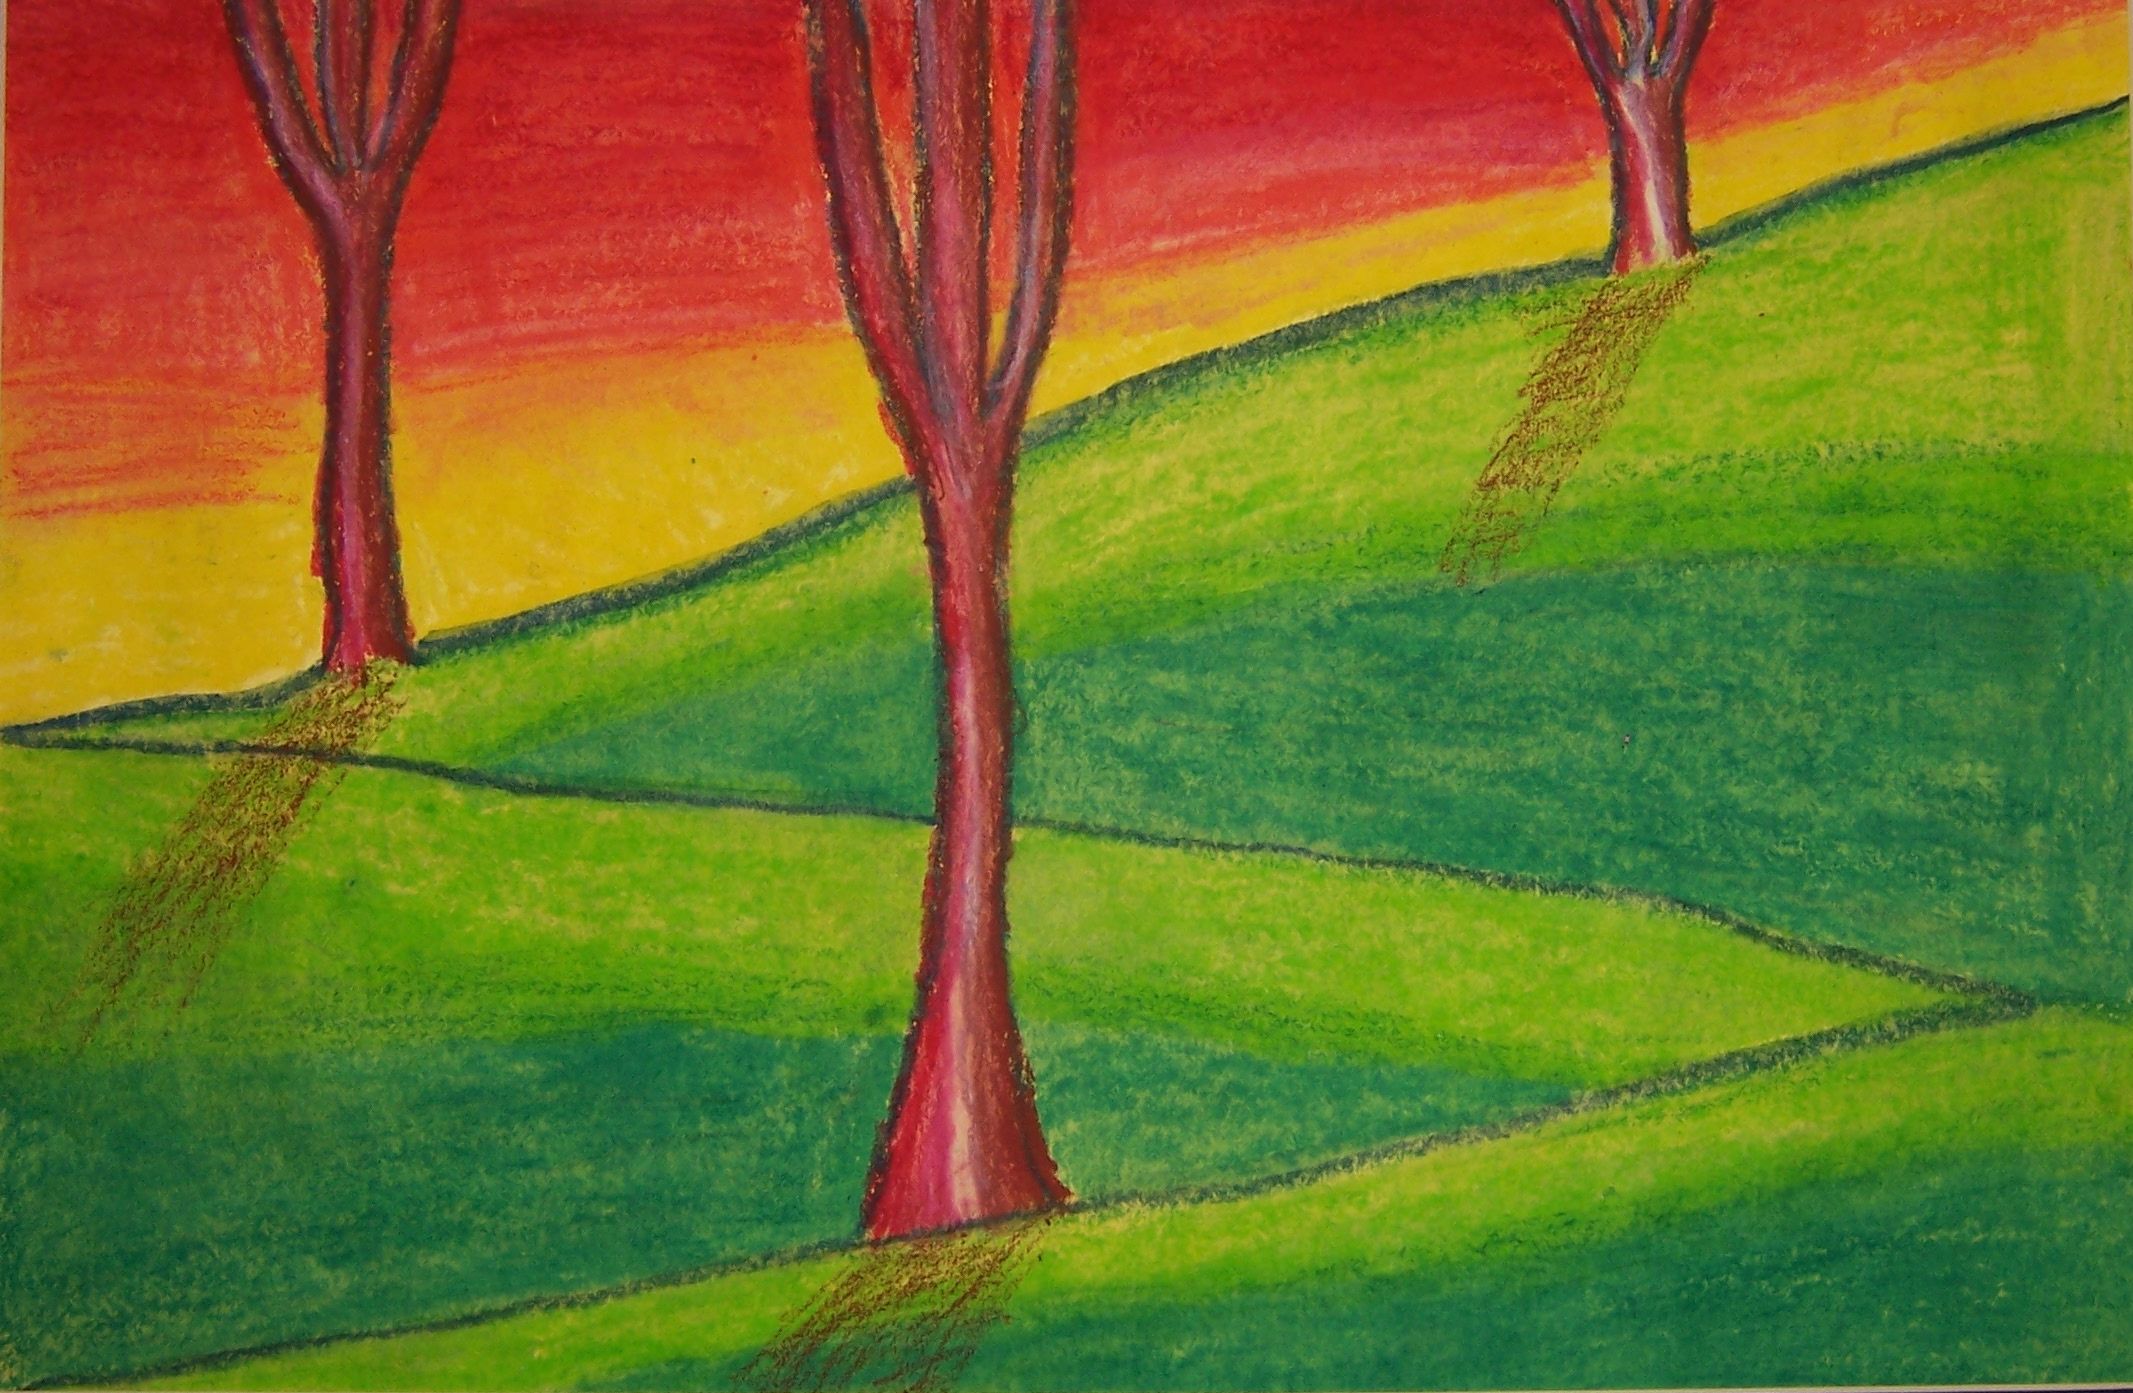 Easy Oil Pastel Landscape painting for beginners